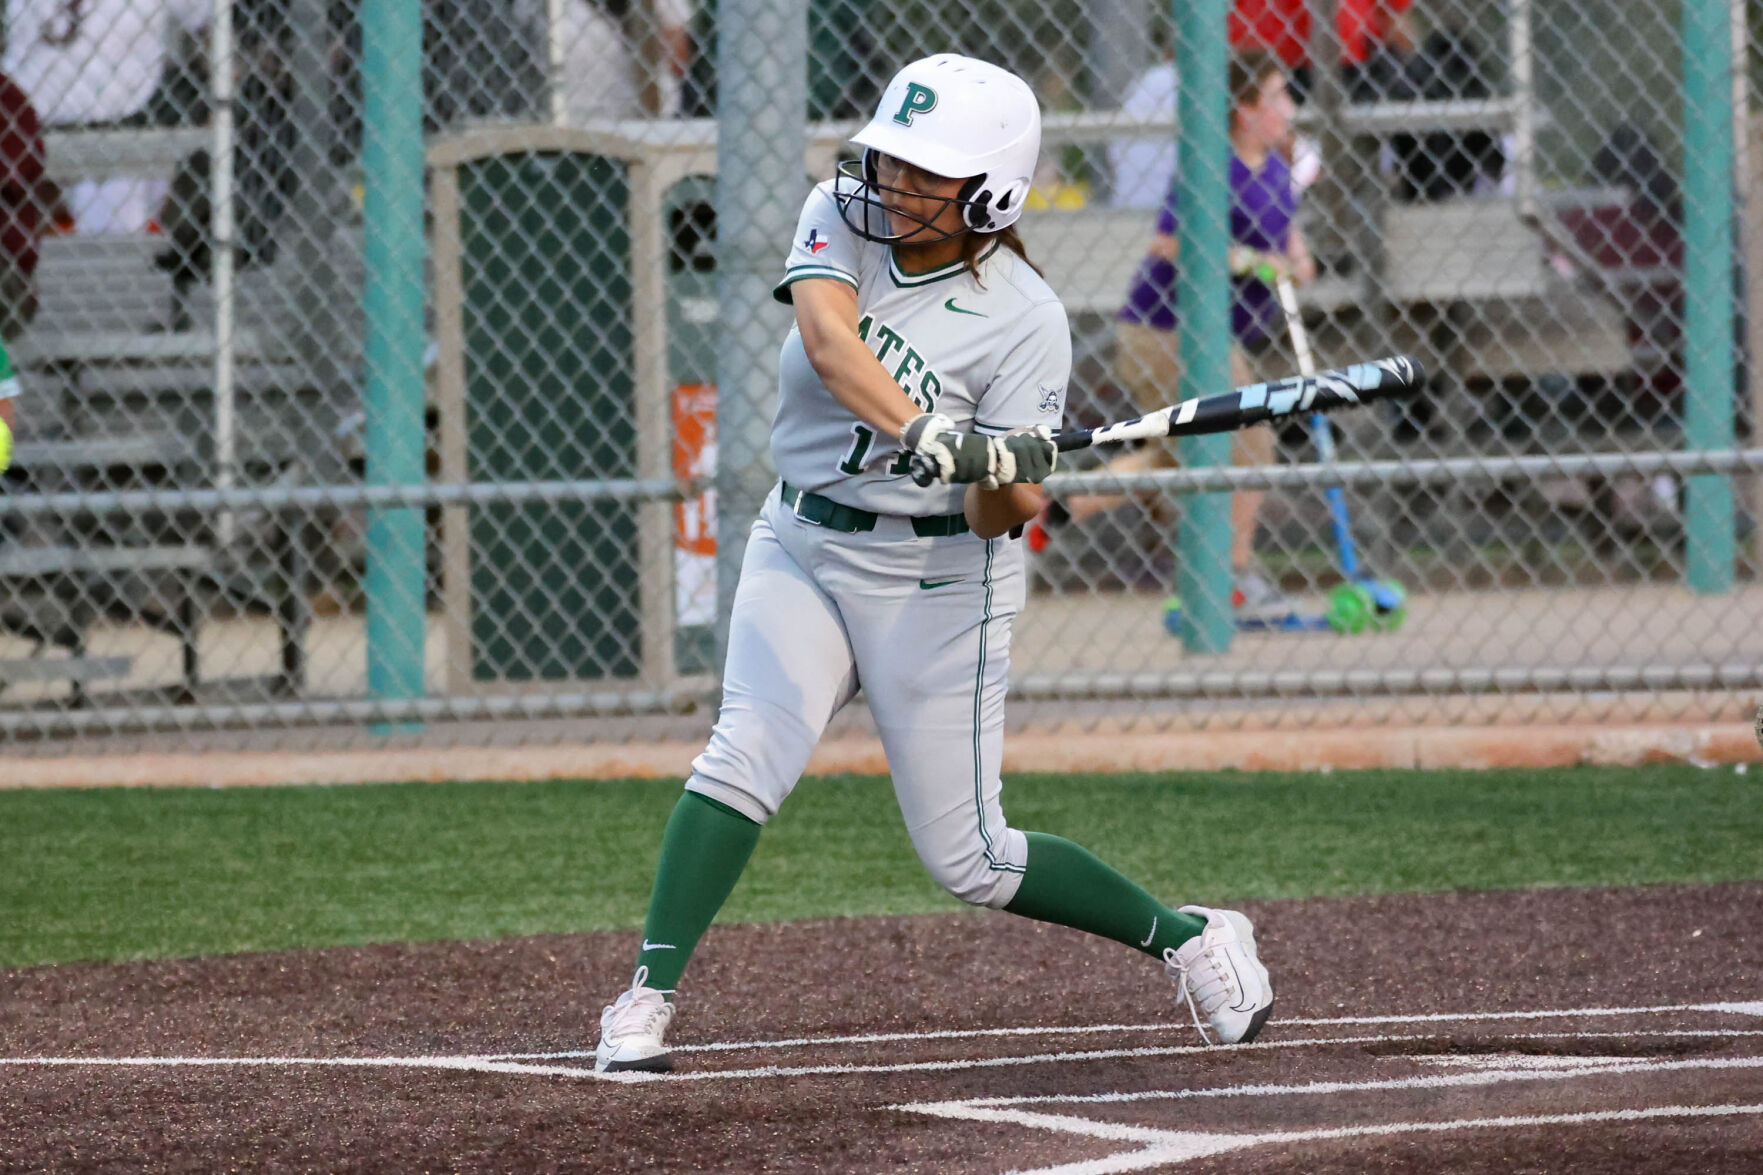 District Championships Decided: Poteet Claims Undefeated Title, Rowlett & Sachse Playoff Bound